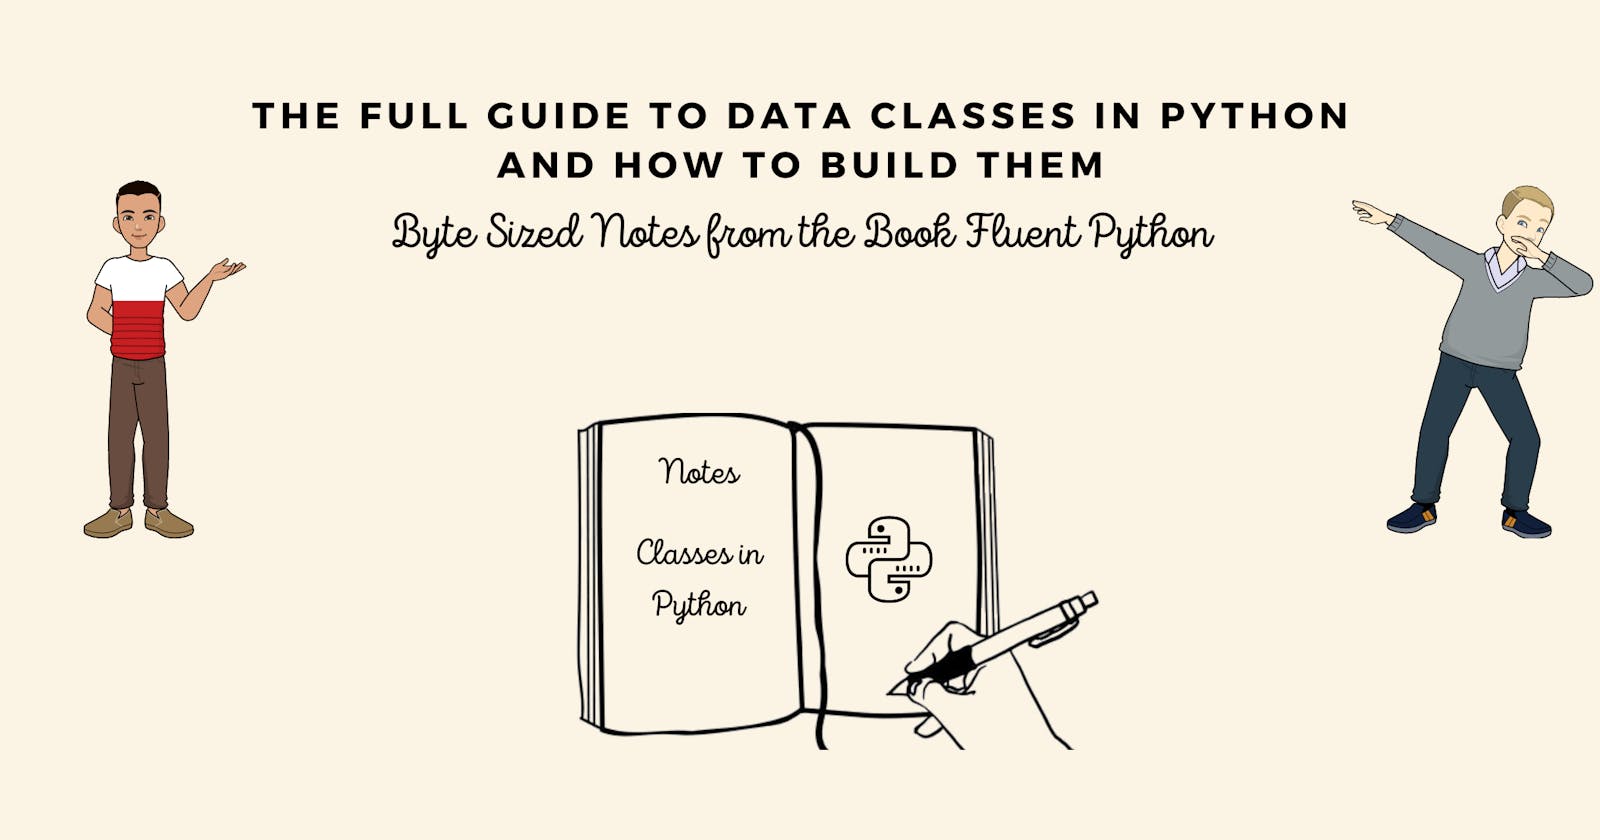 3 Ways to Build Data Classes in Python